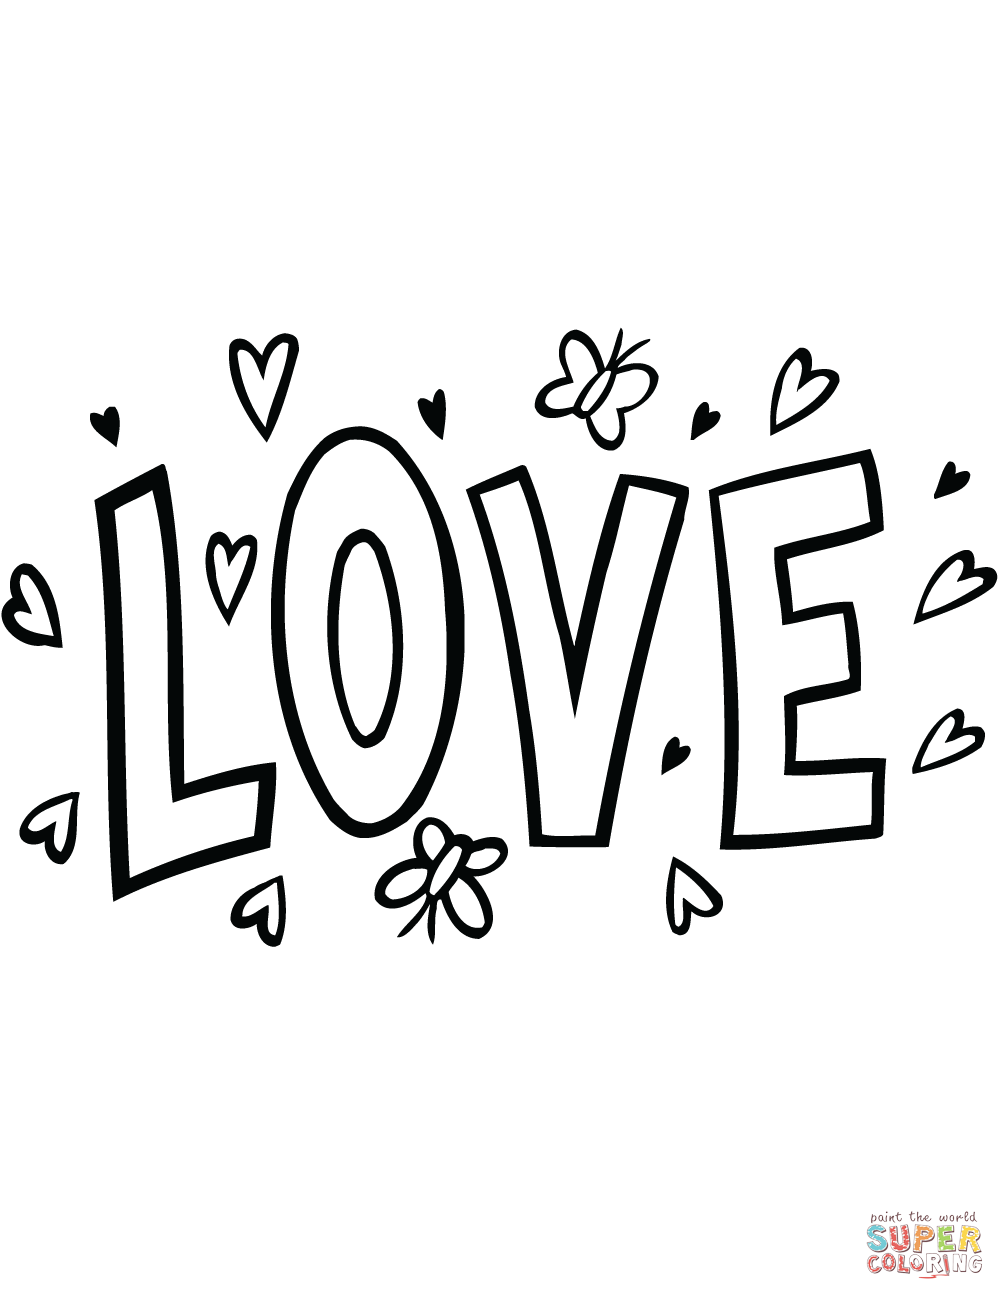 Love word art coloring page free printable coloring pages